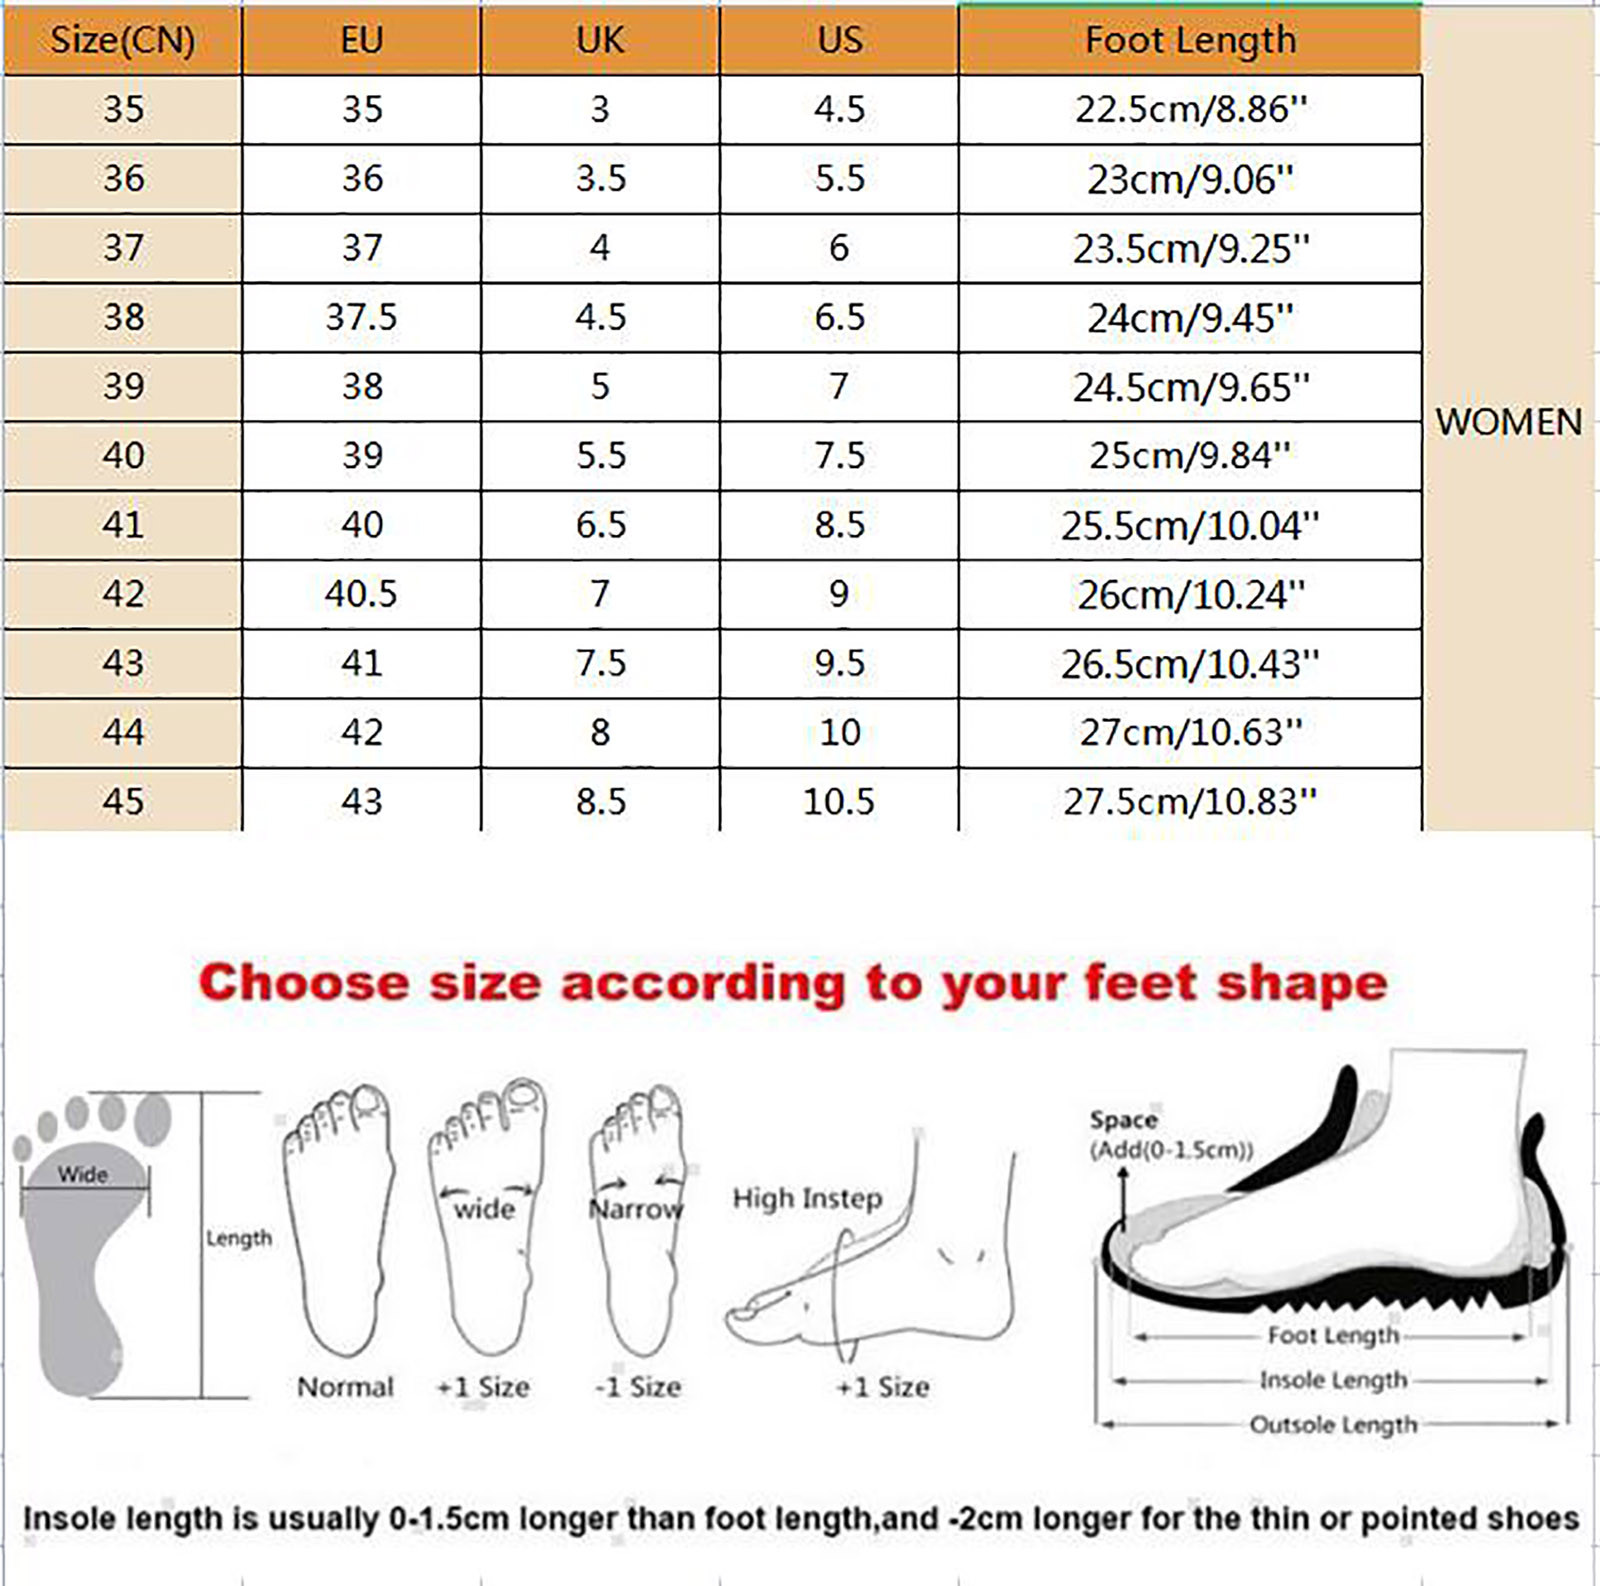 jsaierl Women's Gogo Boots, Leather Waterproof Platform Knee High Boots Thigh Hight Square Toe High-heeled Boot Shoes - image 3 of 9